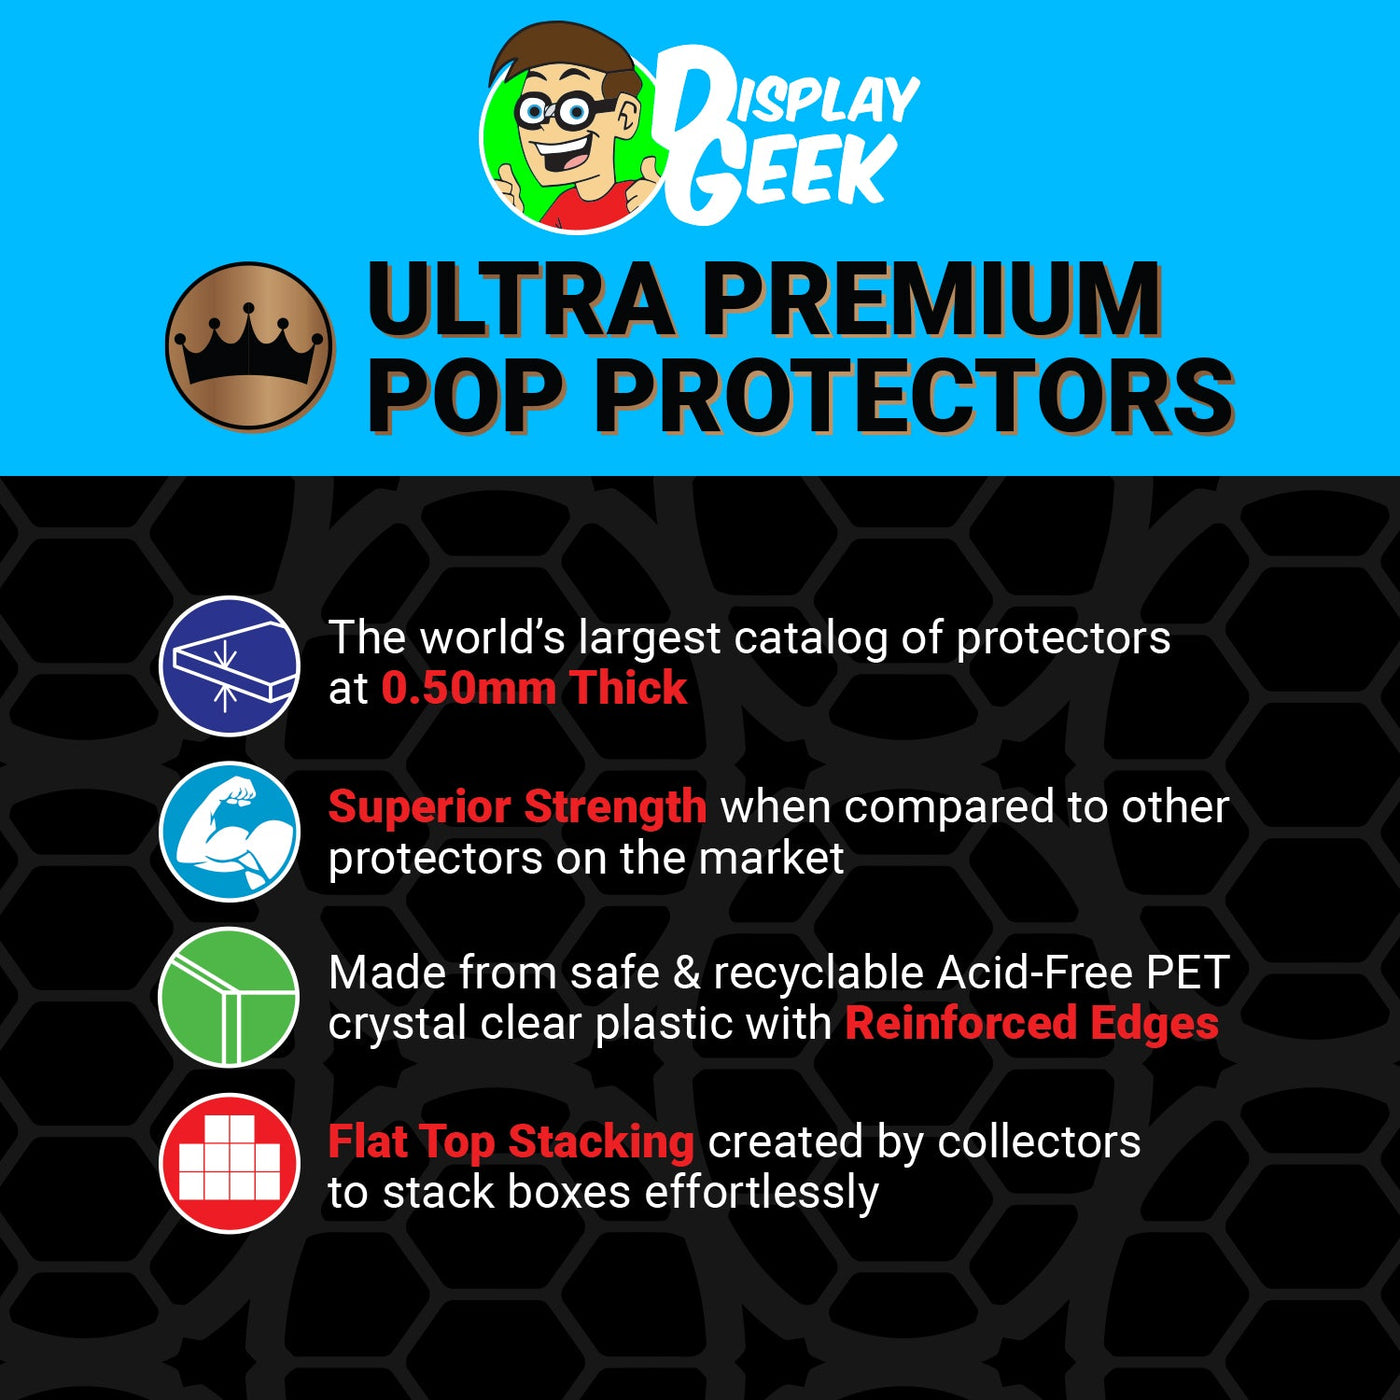 Pop Protector for Sleeping Beauty Castle and Walt Disney #20 Funko Pop Town on The Protector Guide App by Display Geek